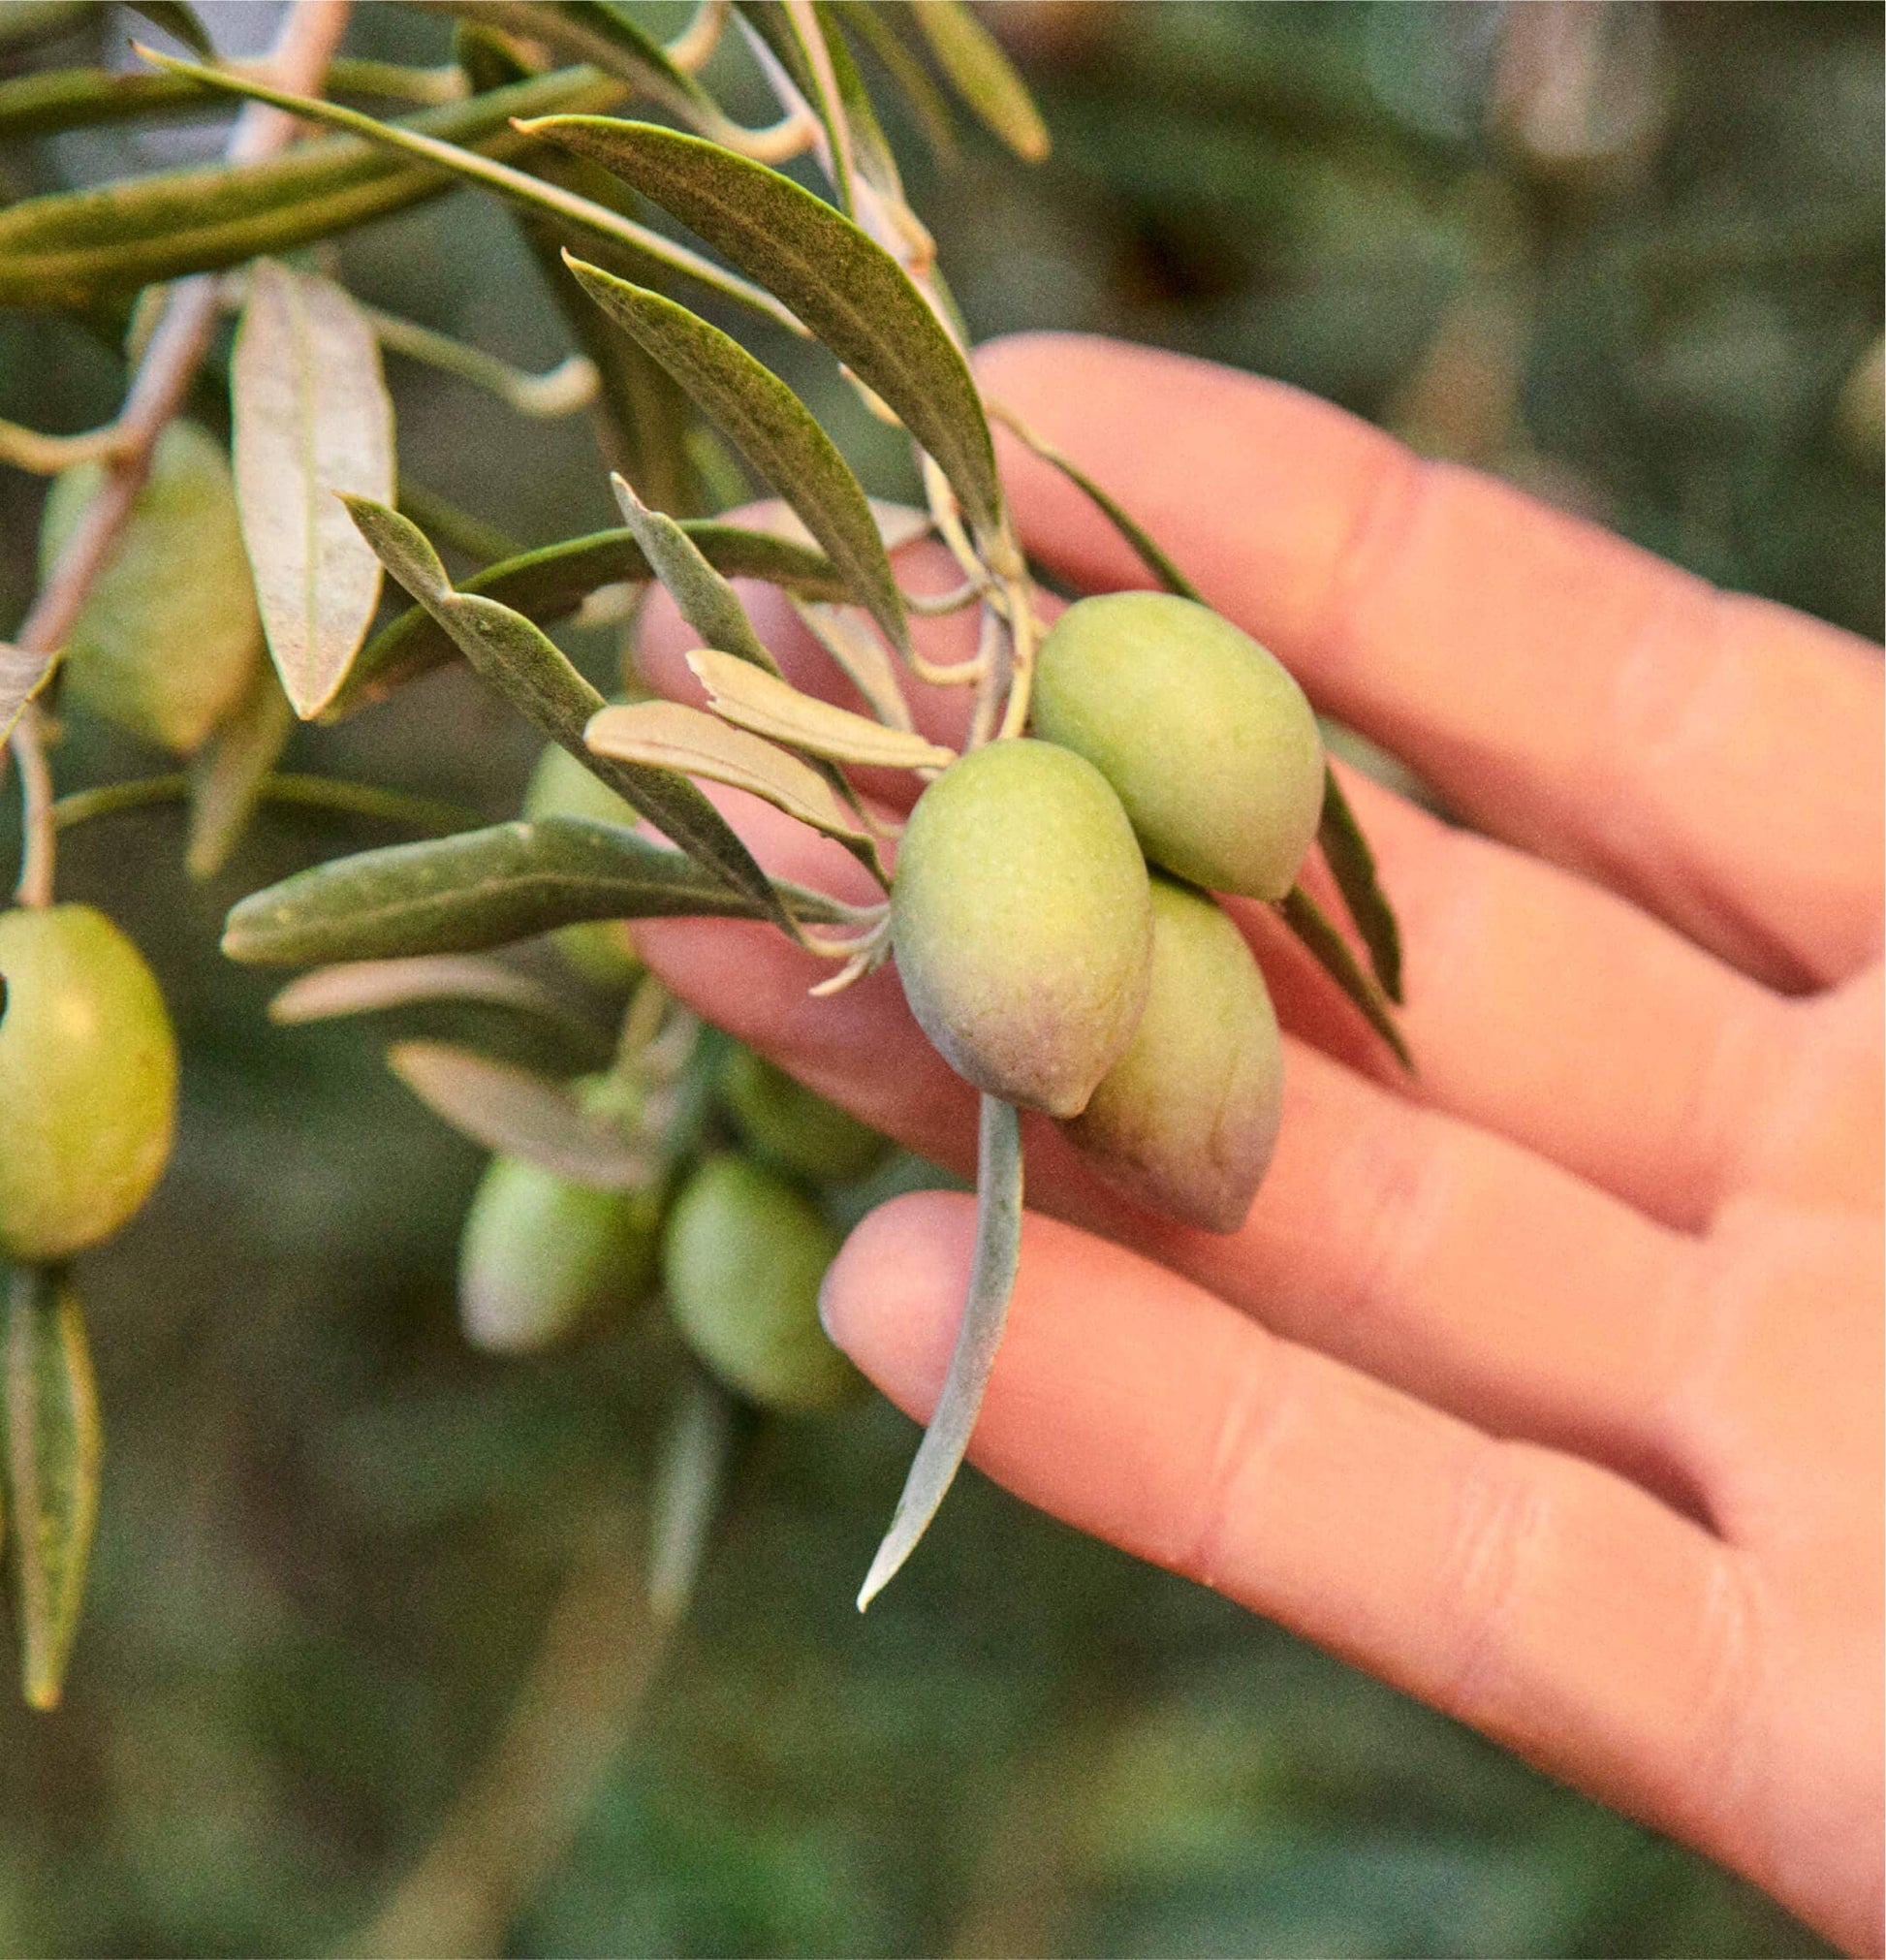 Drizzle is pressed from the season's first harvest, creating a super concentrated olive oil.